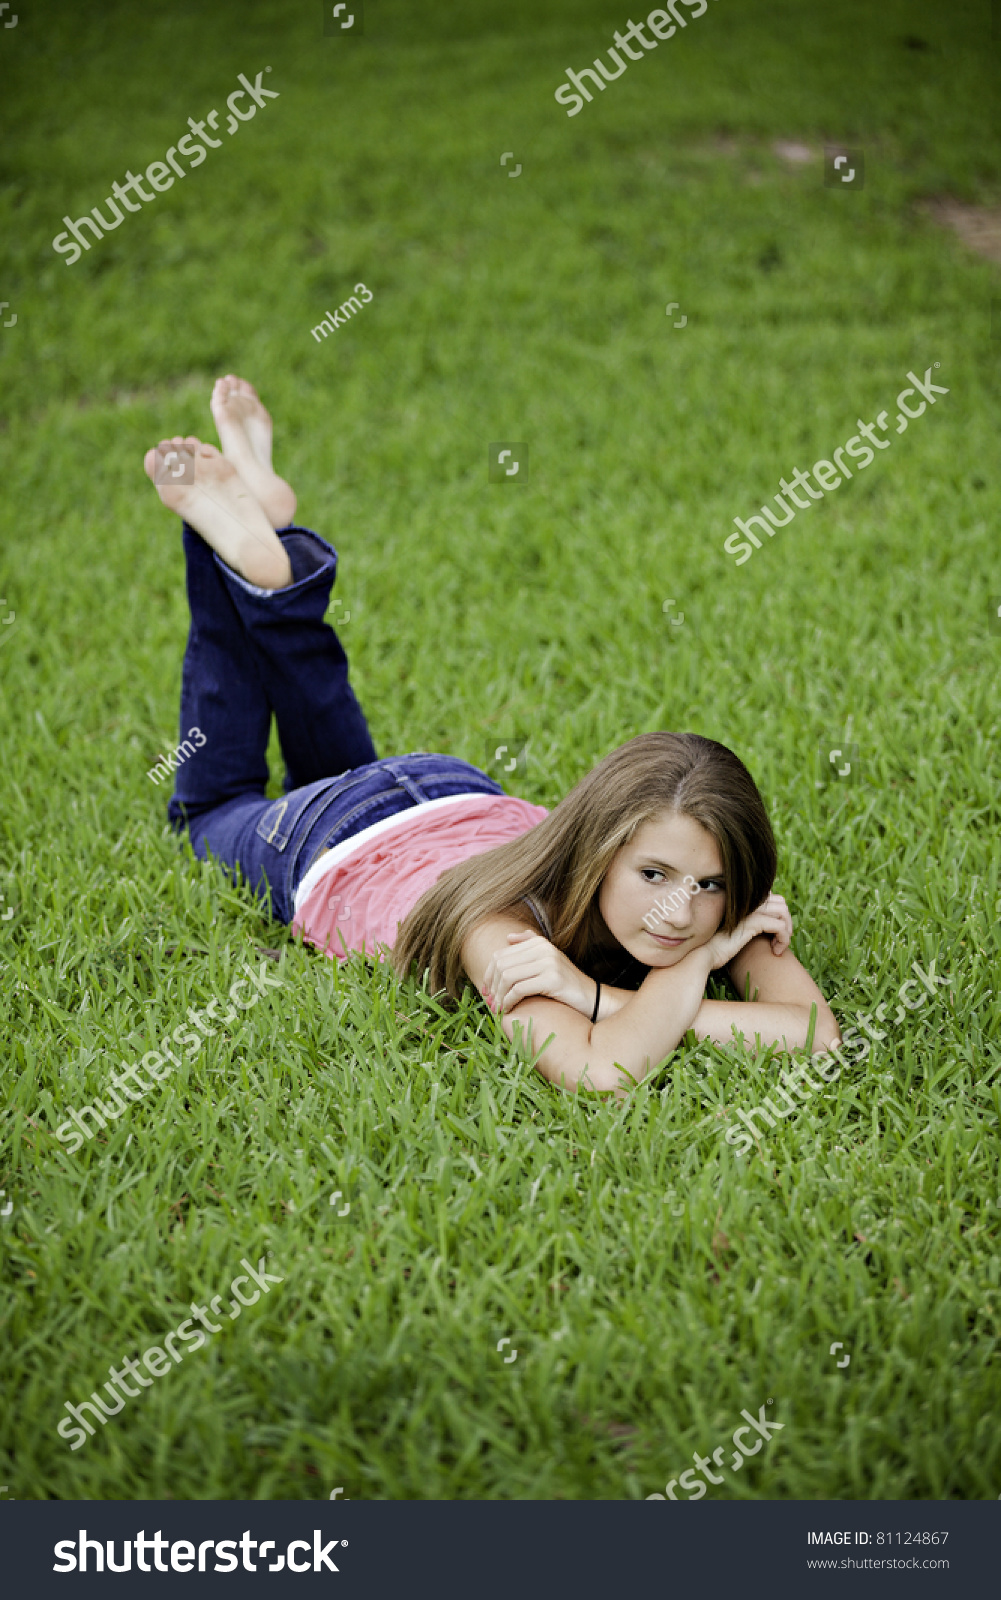 A Pretty Teenage Female Girl Laying Face Down On Green Grass Looking ...